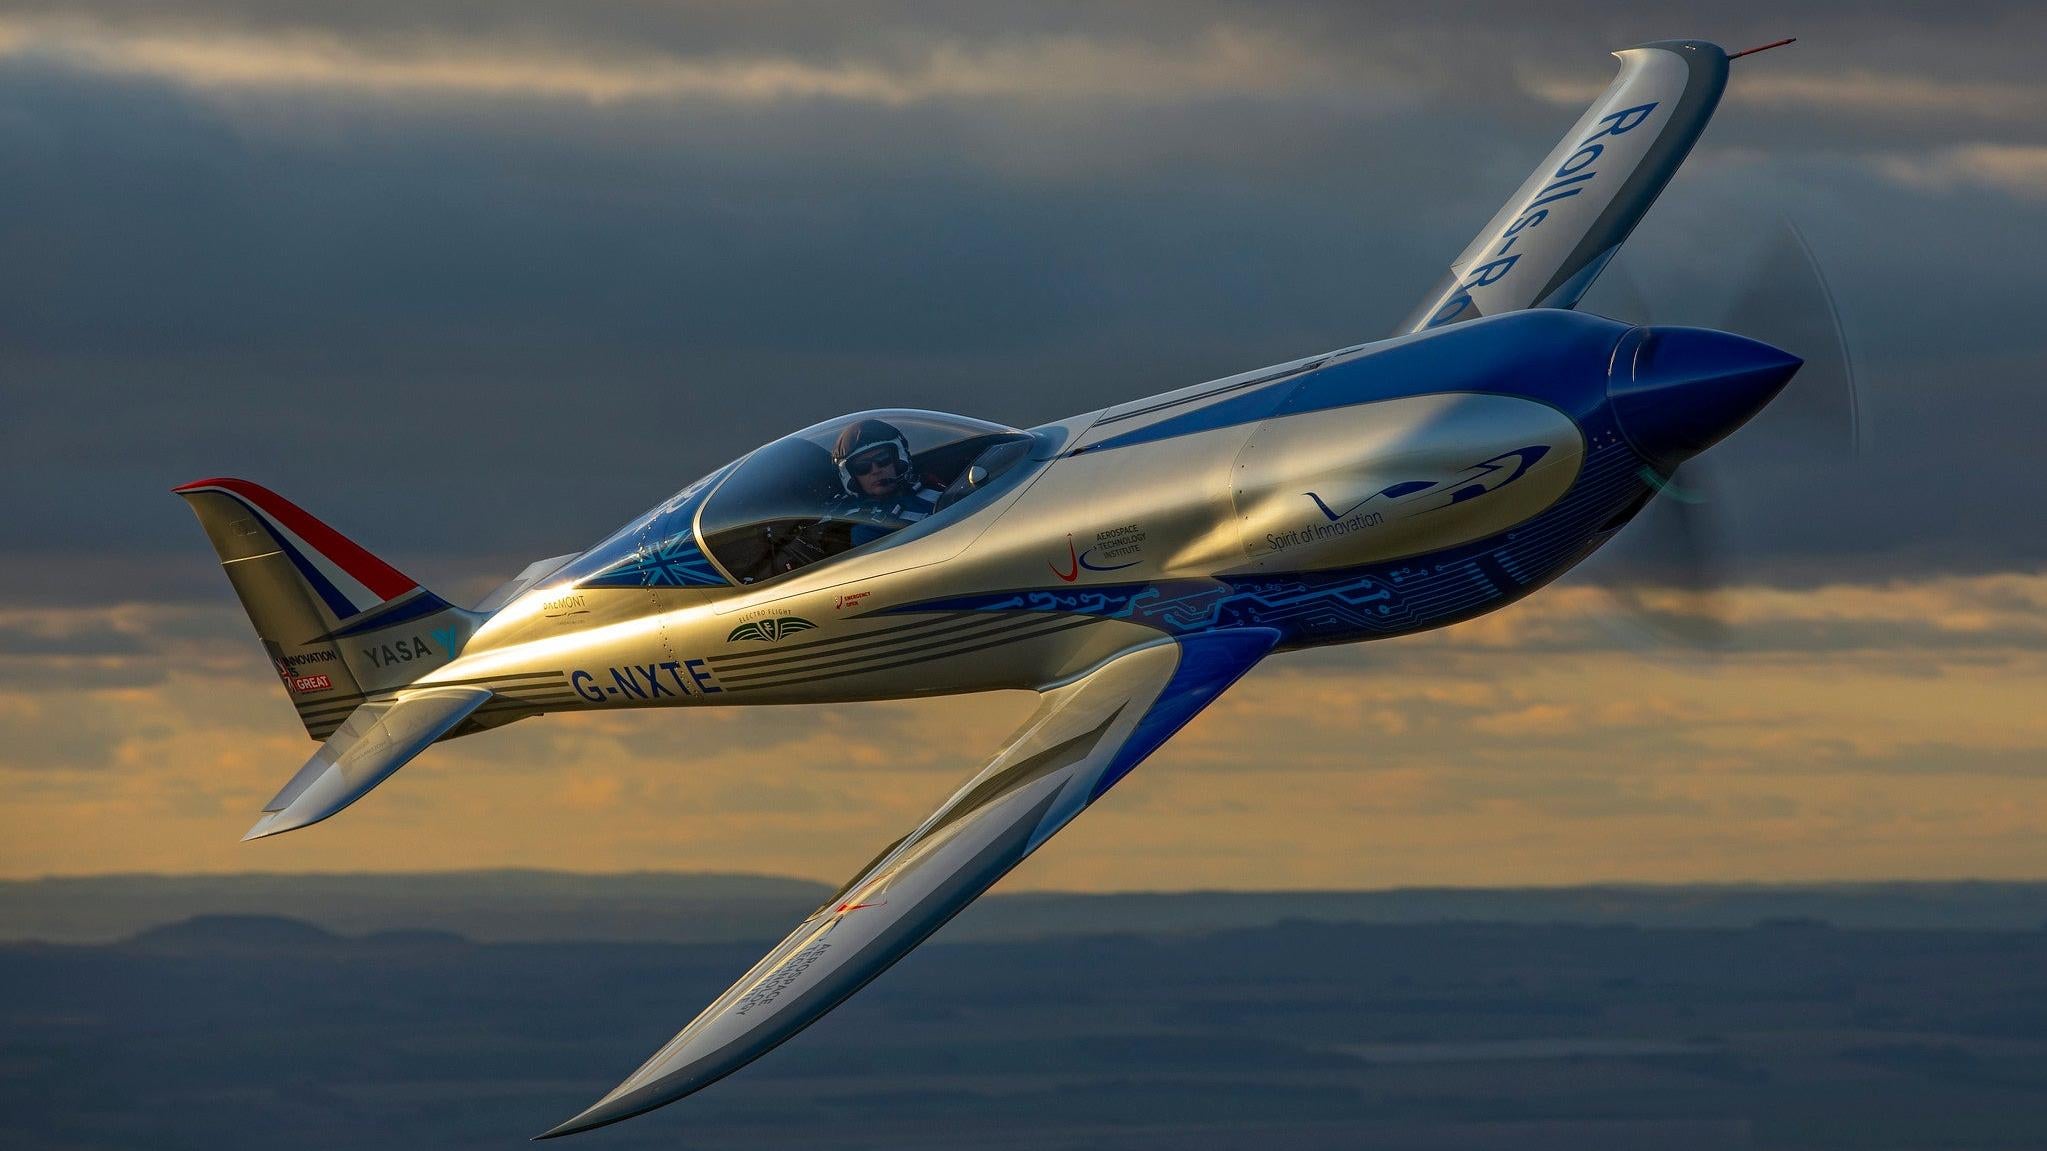 Rolls-Royce Claims Its All-Electric Plane With the Clunky Name Is the World’s Fastest